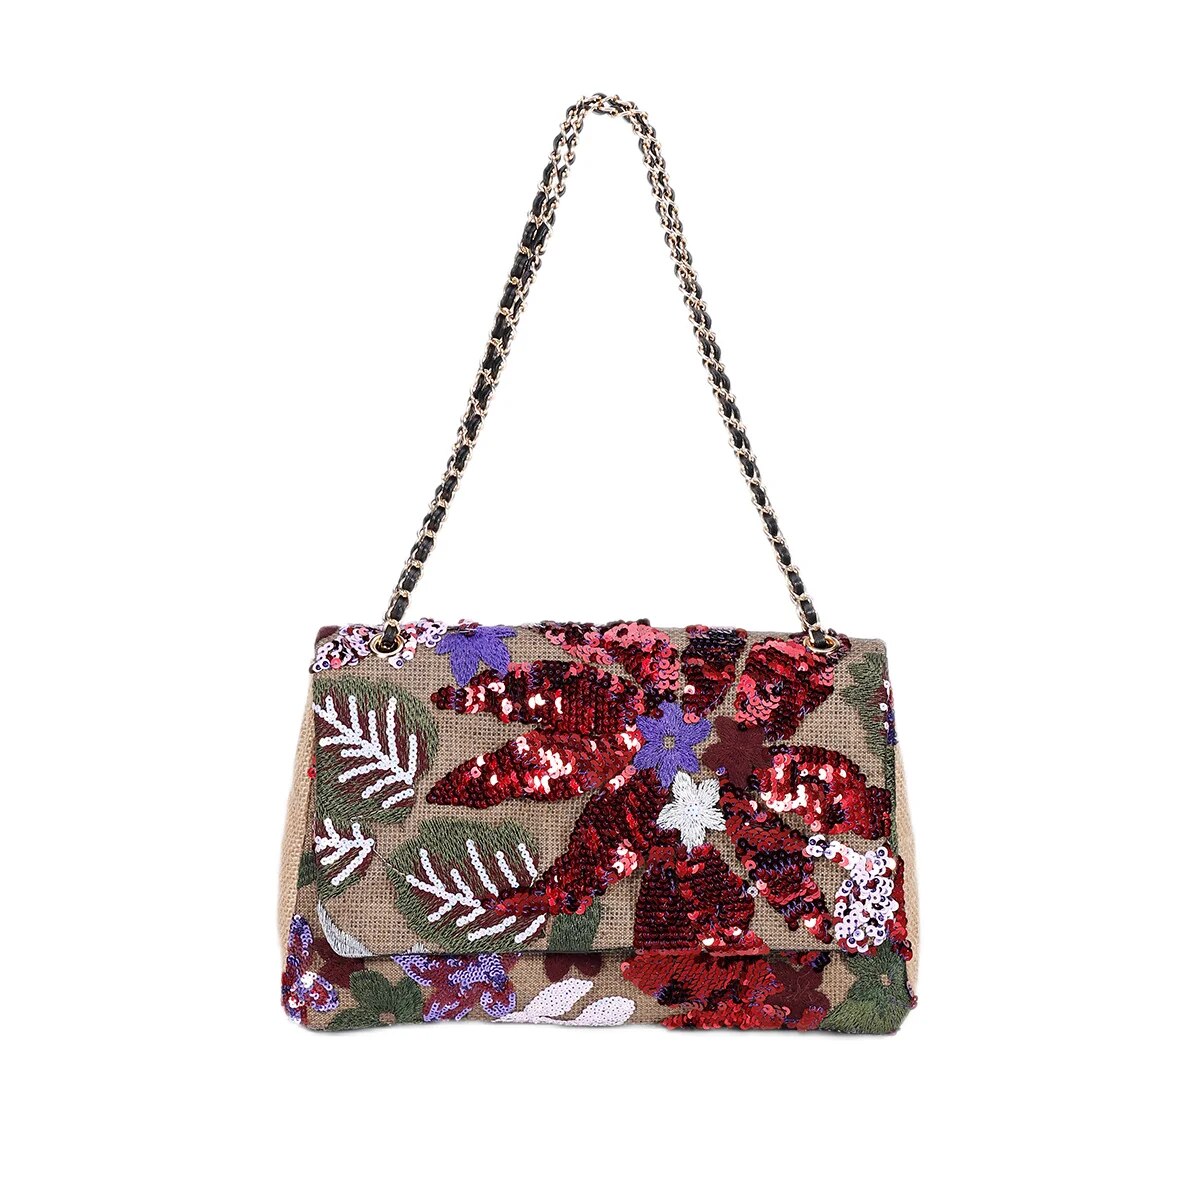 TEEK - Hand-made Embroidery Woven Floral Beaded Sequin Underarm Bag BAG theteekdotcom Wine Red  